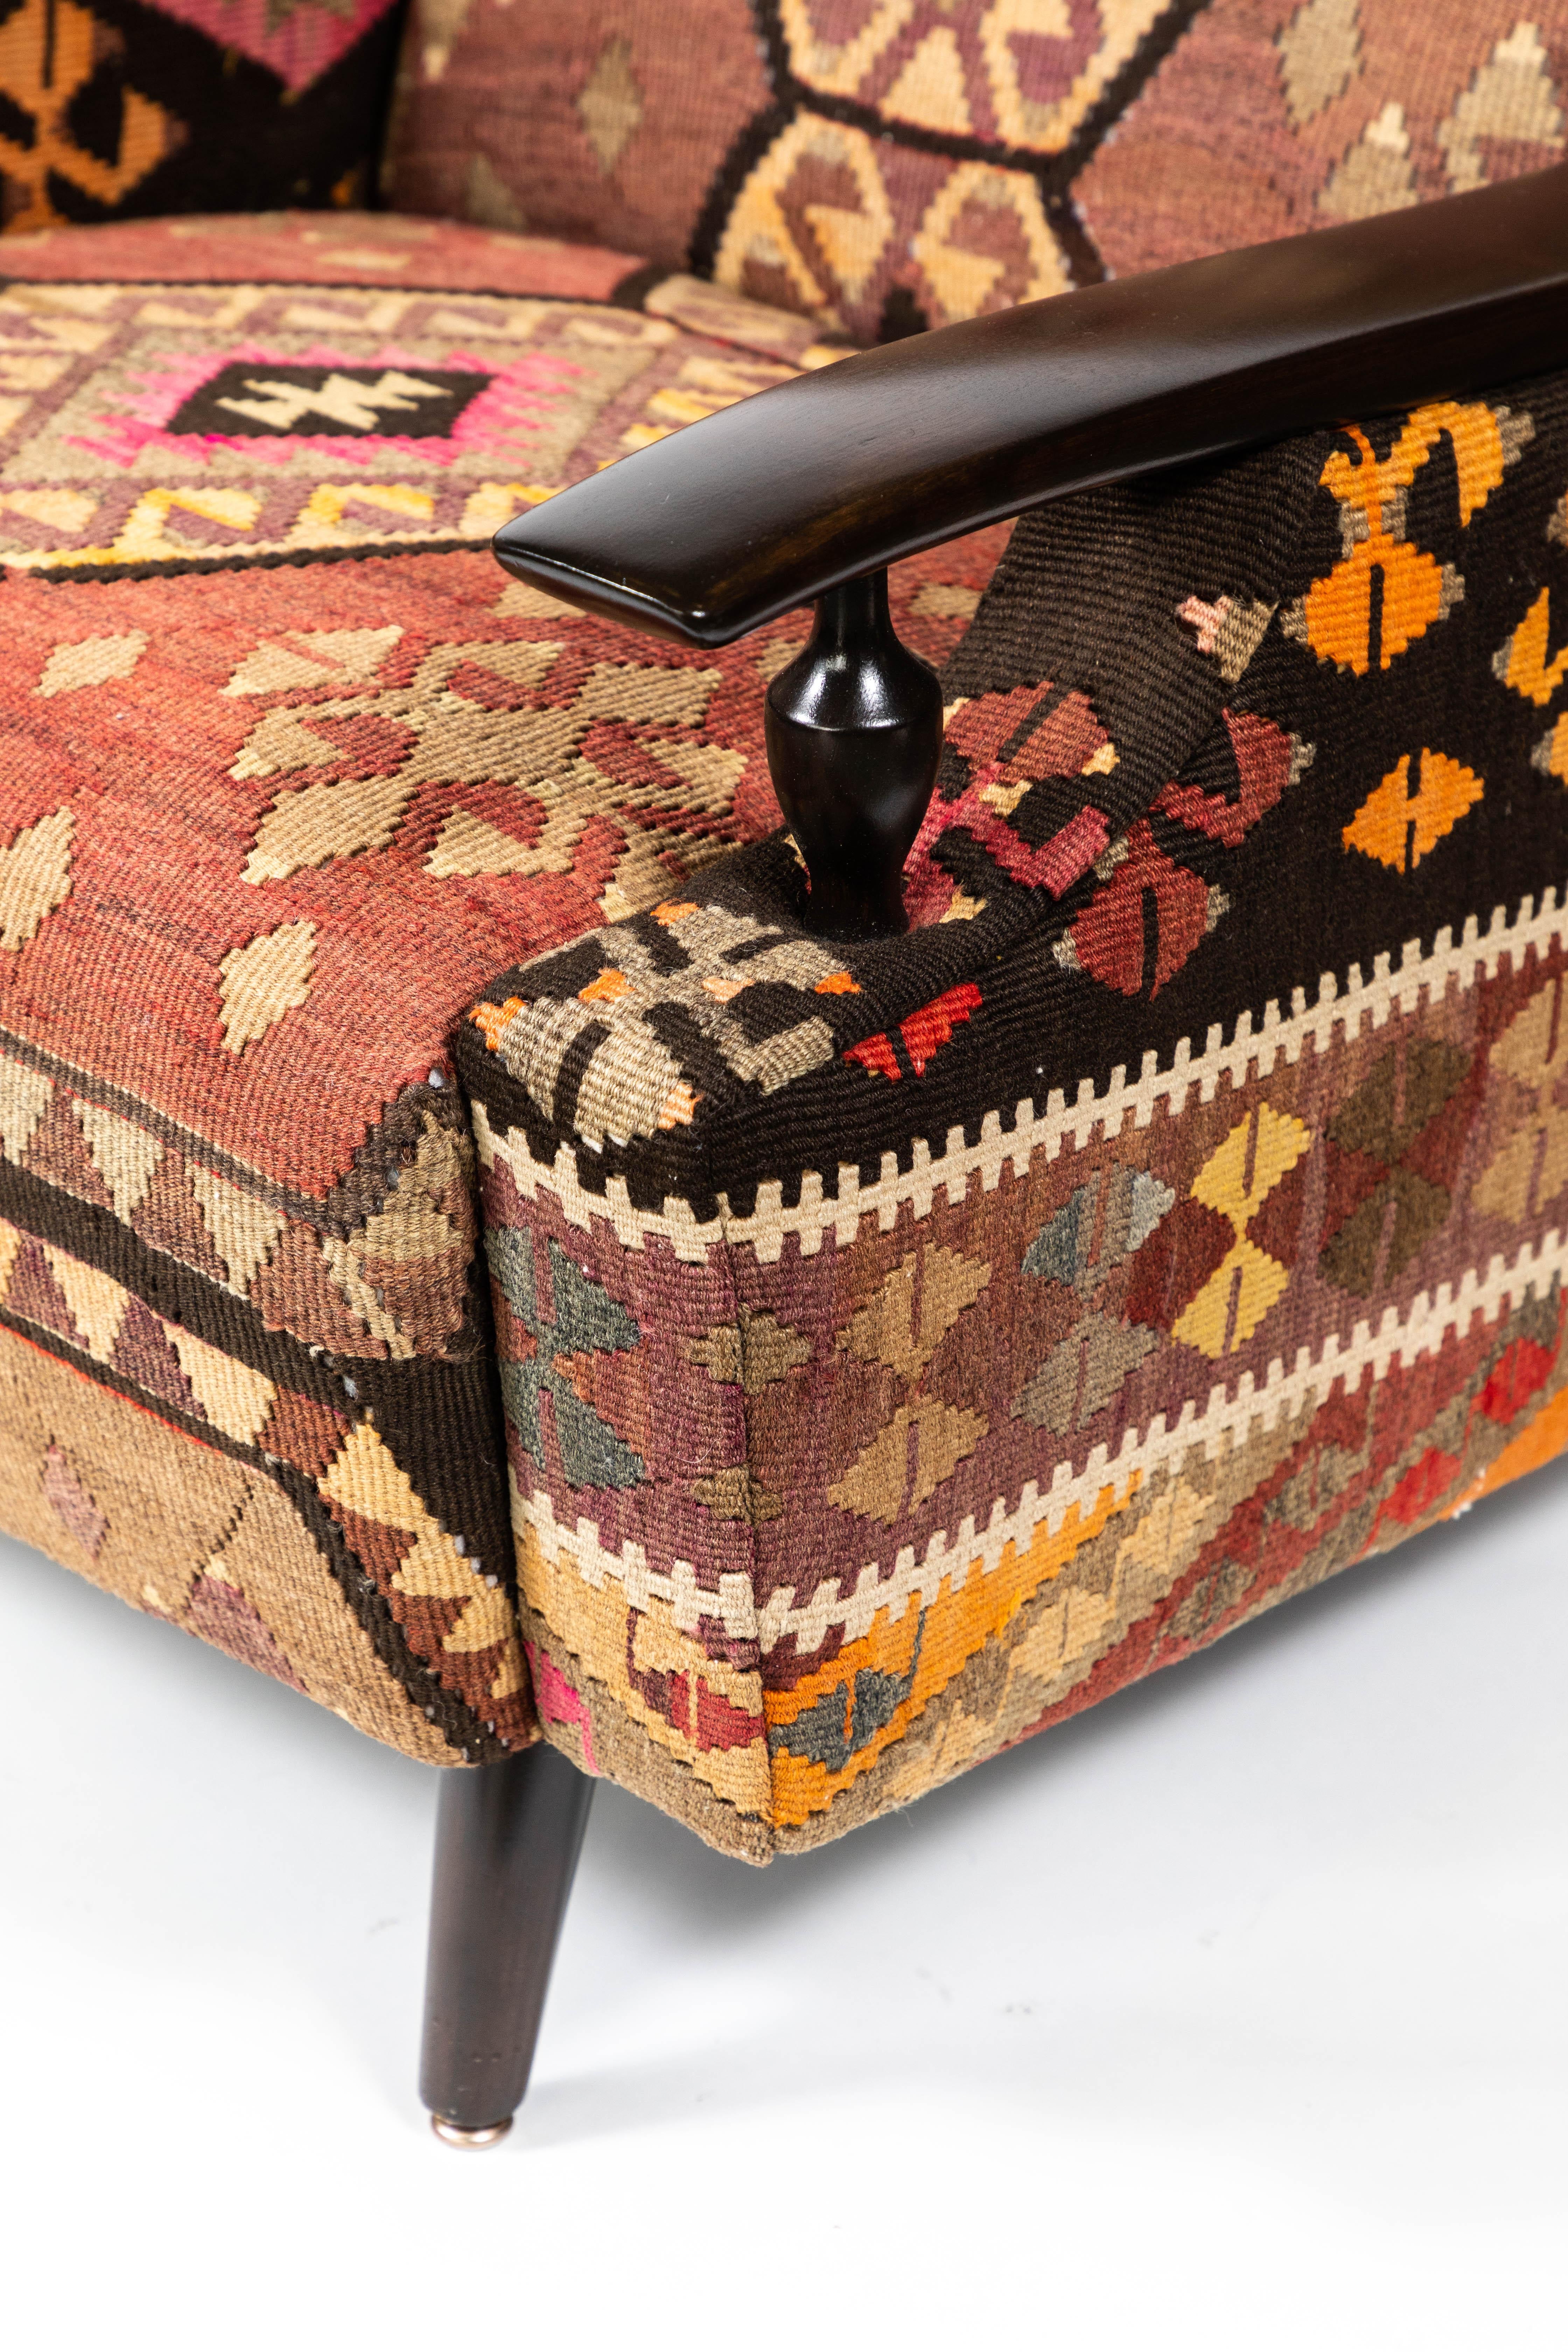 Textile Vintage Lounge Chair Newly Upholstered in a Vintage Wool Kilim Rug